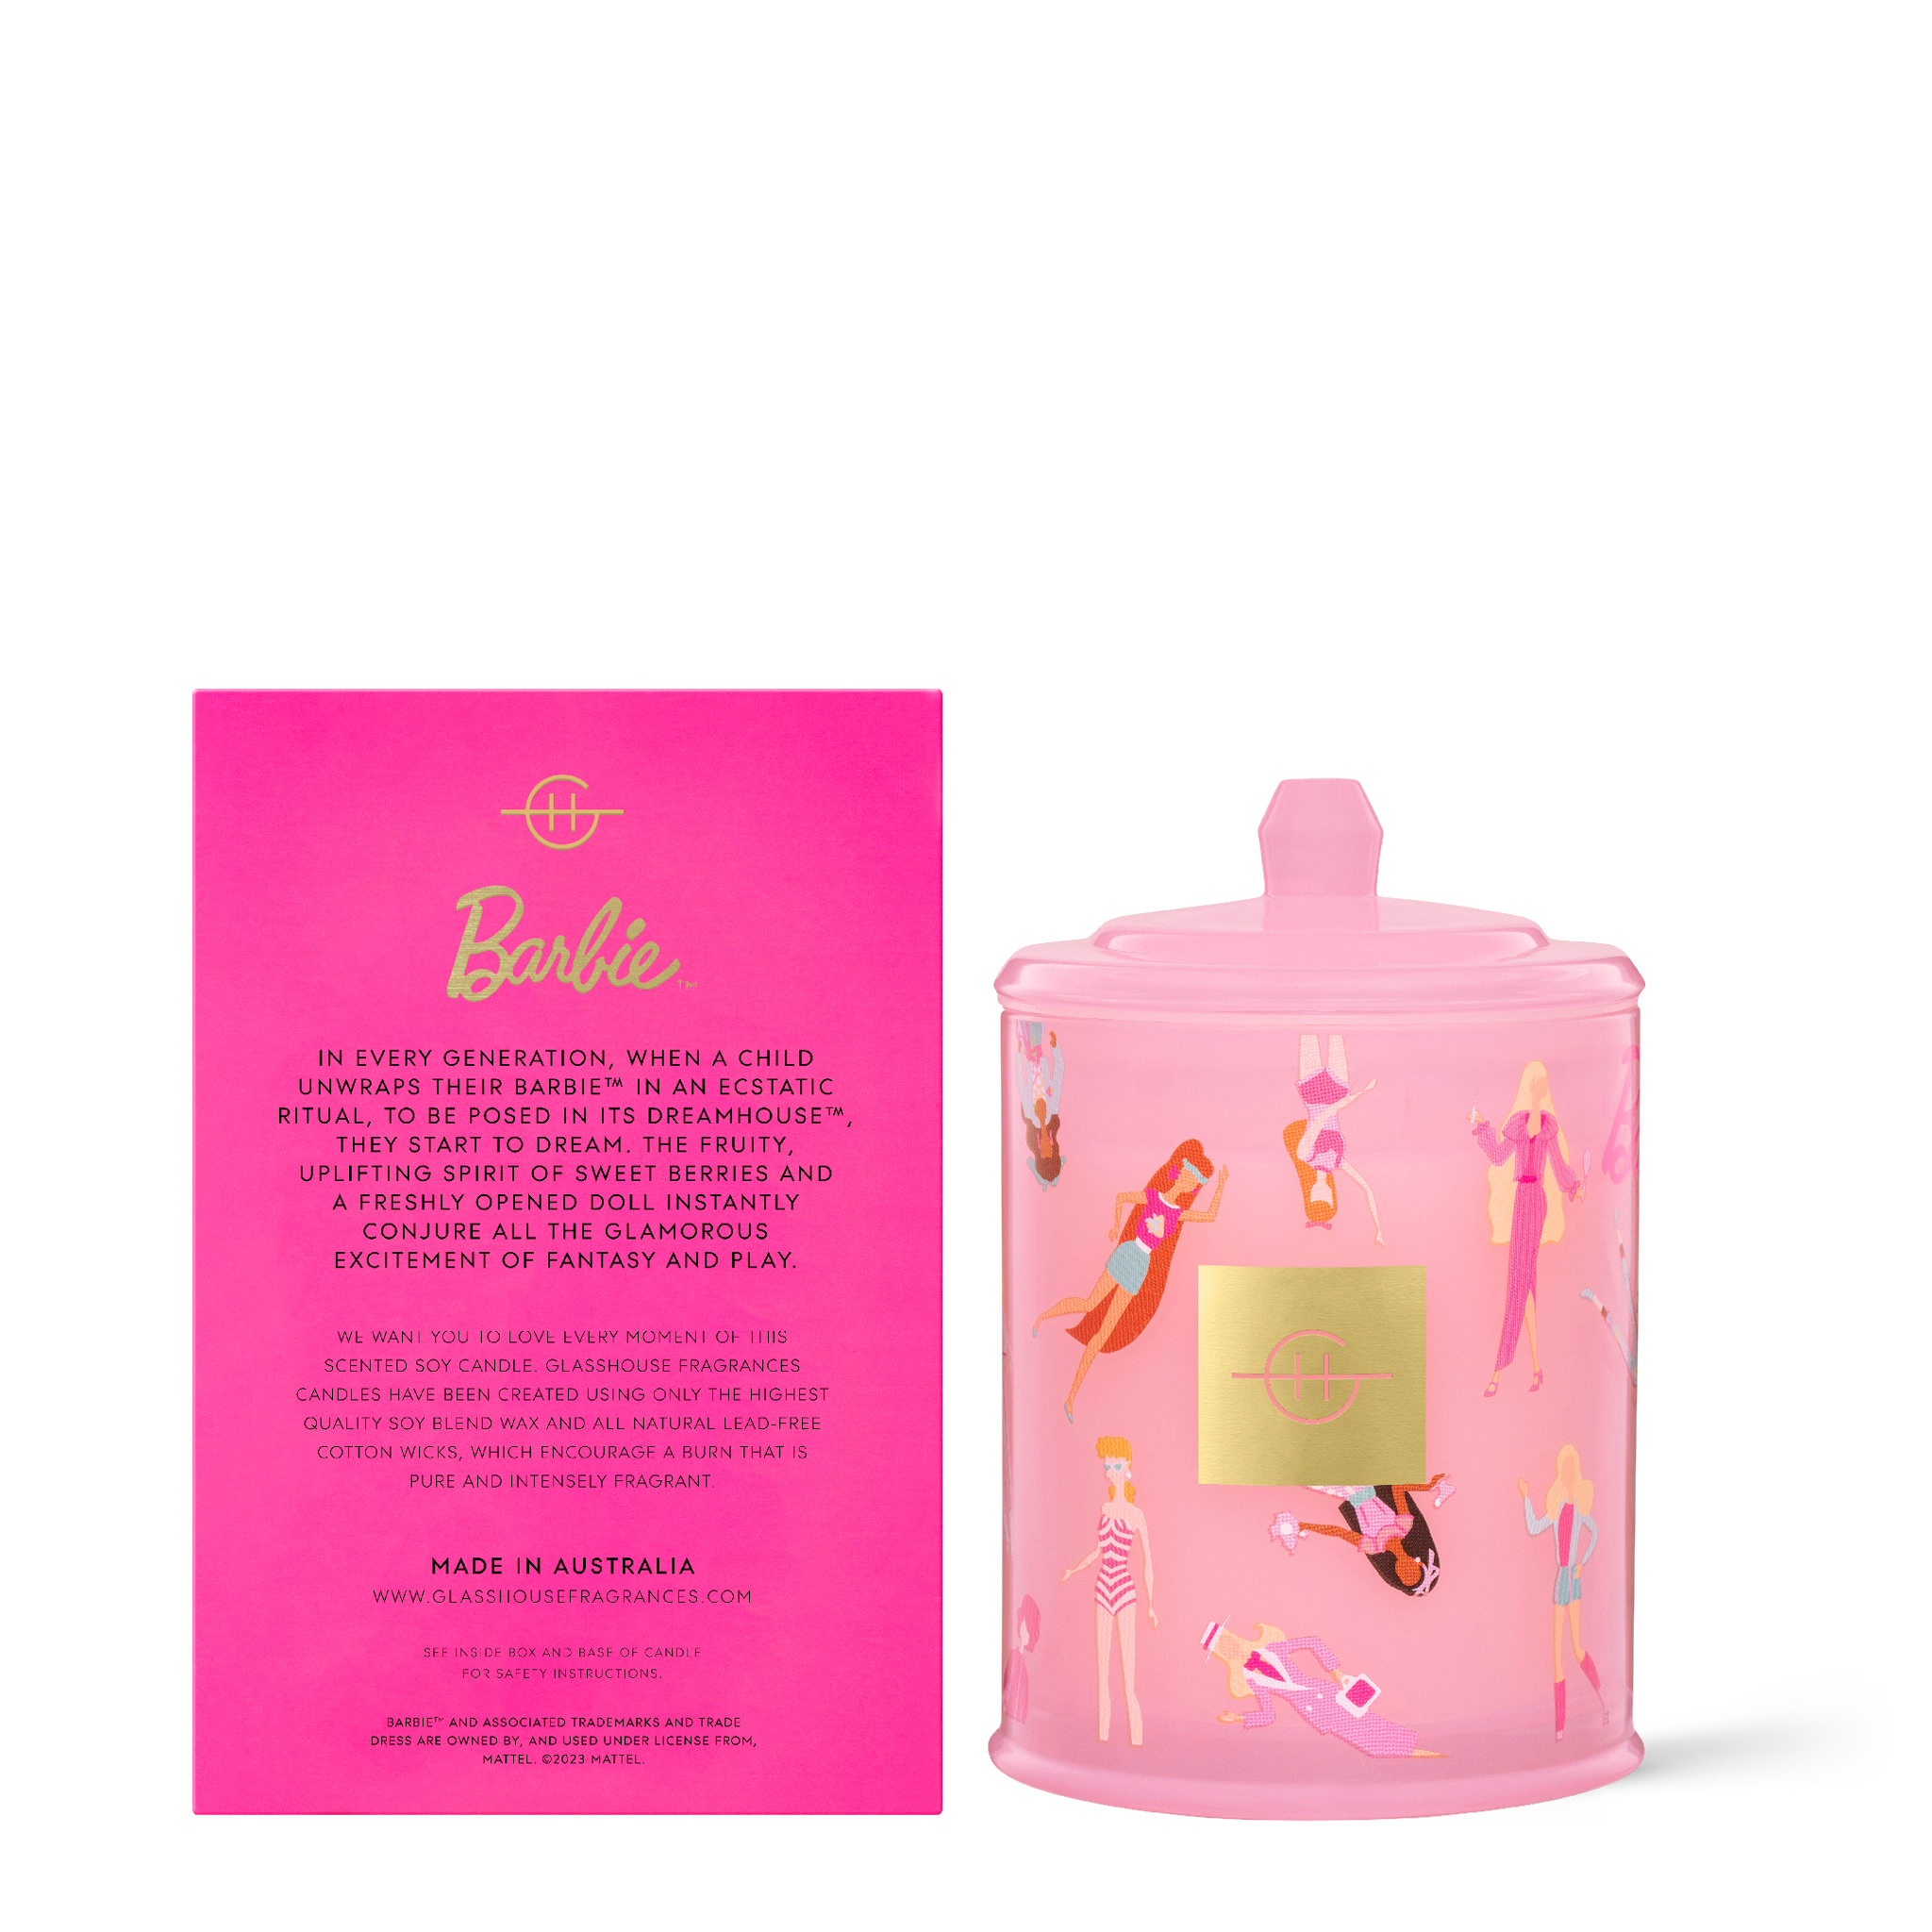 Back of product image Glasshouse Fragrances Barbie™ Dreamhouse™ 380g Triple Scented Soy Candle